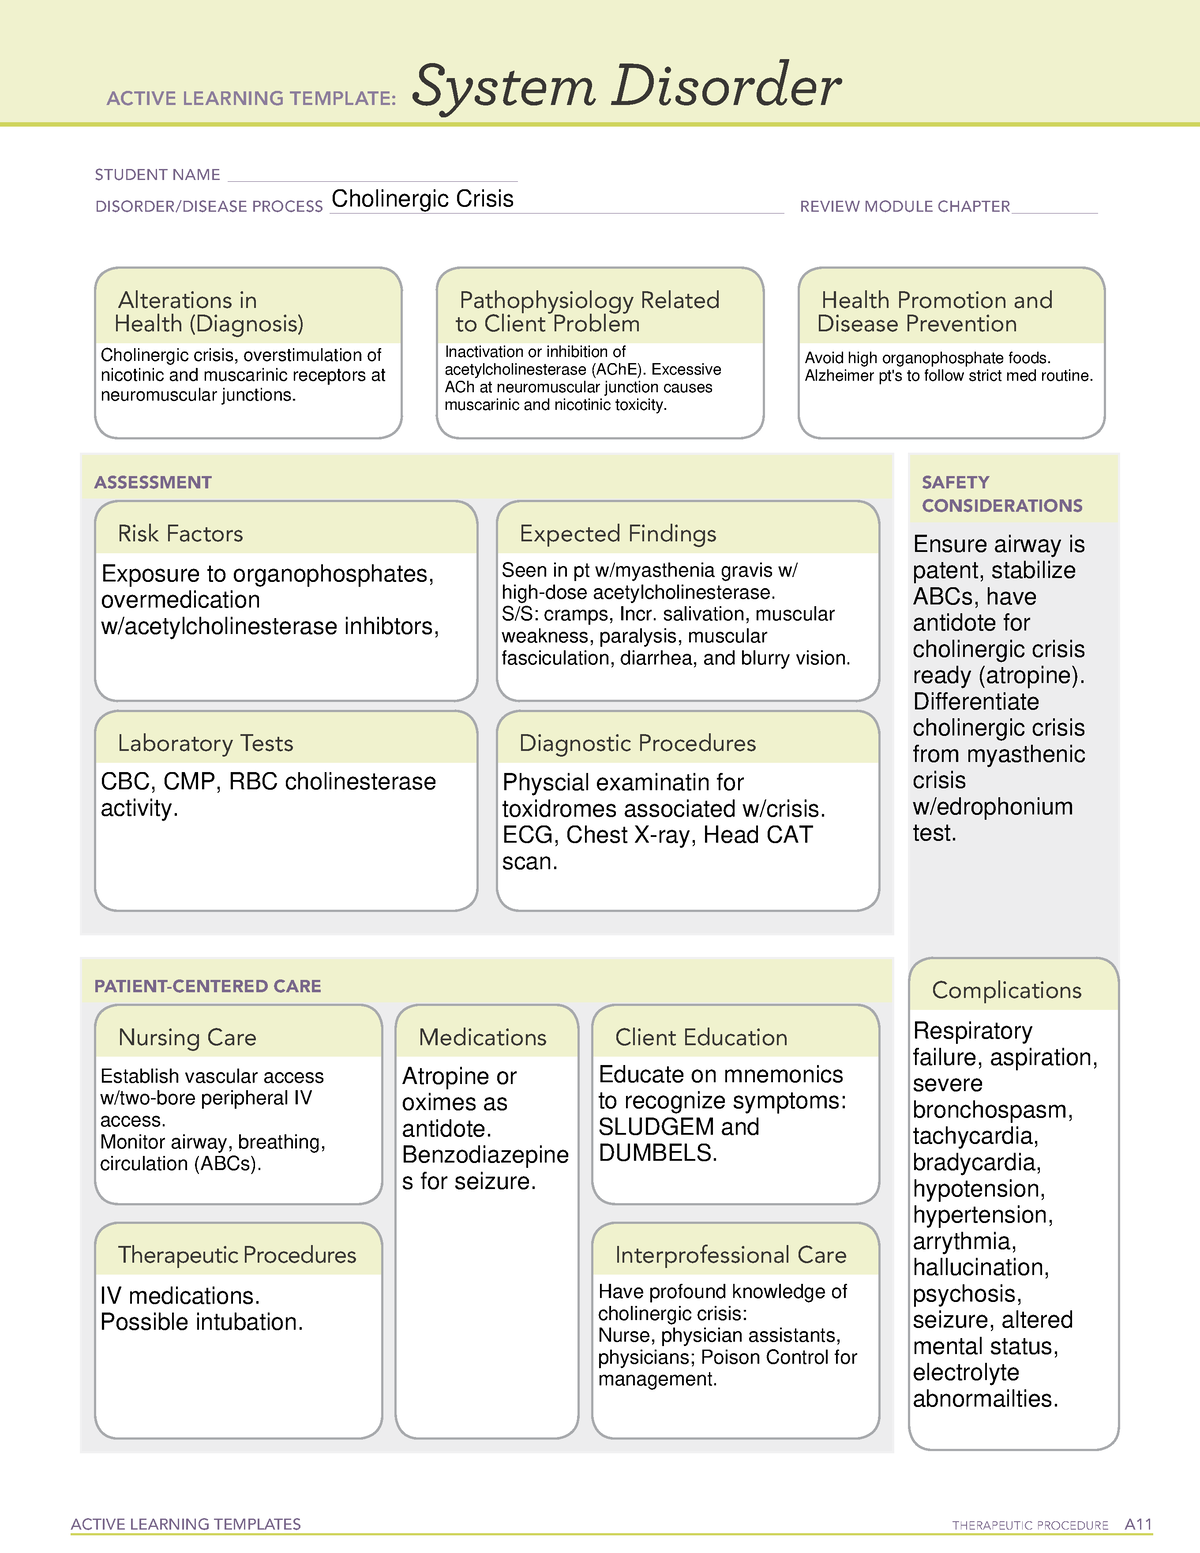 cholinergic-crisis-sd-gg-active-learning-templates-therapeutic